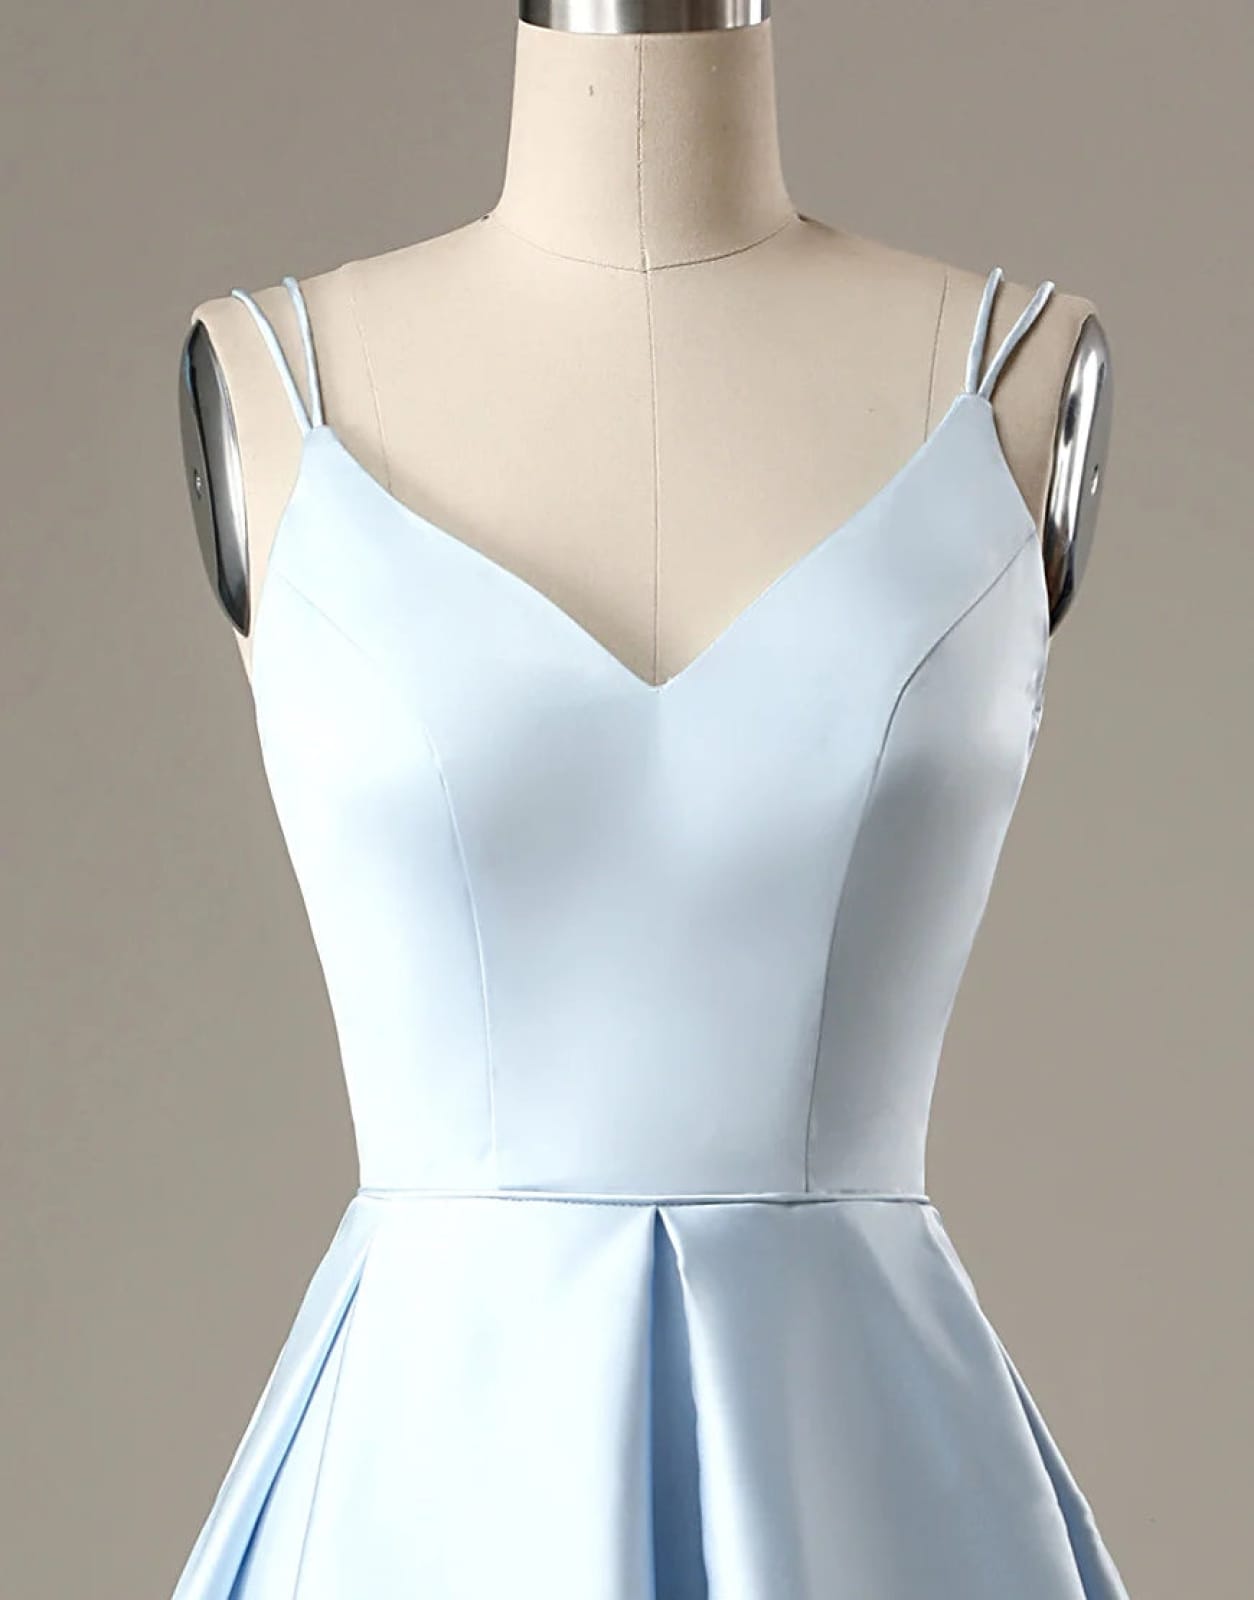 A-Line Blue Satin Double Straps V Back Homecoming Wedding Party Dress